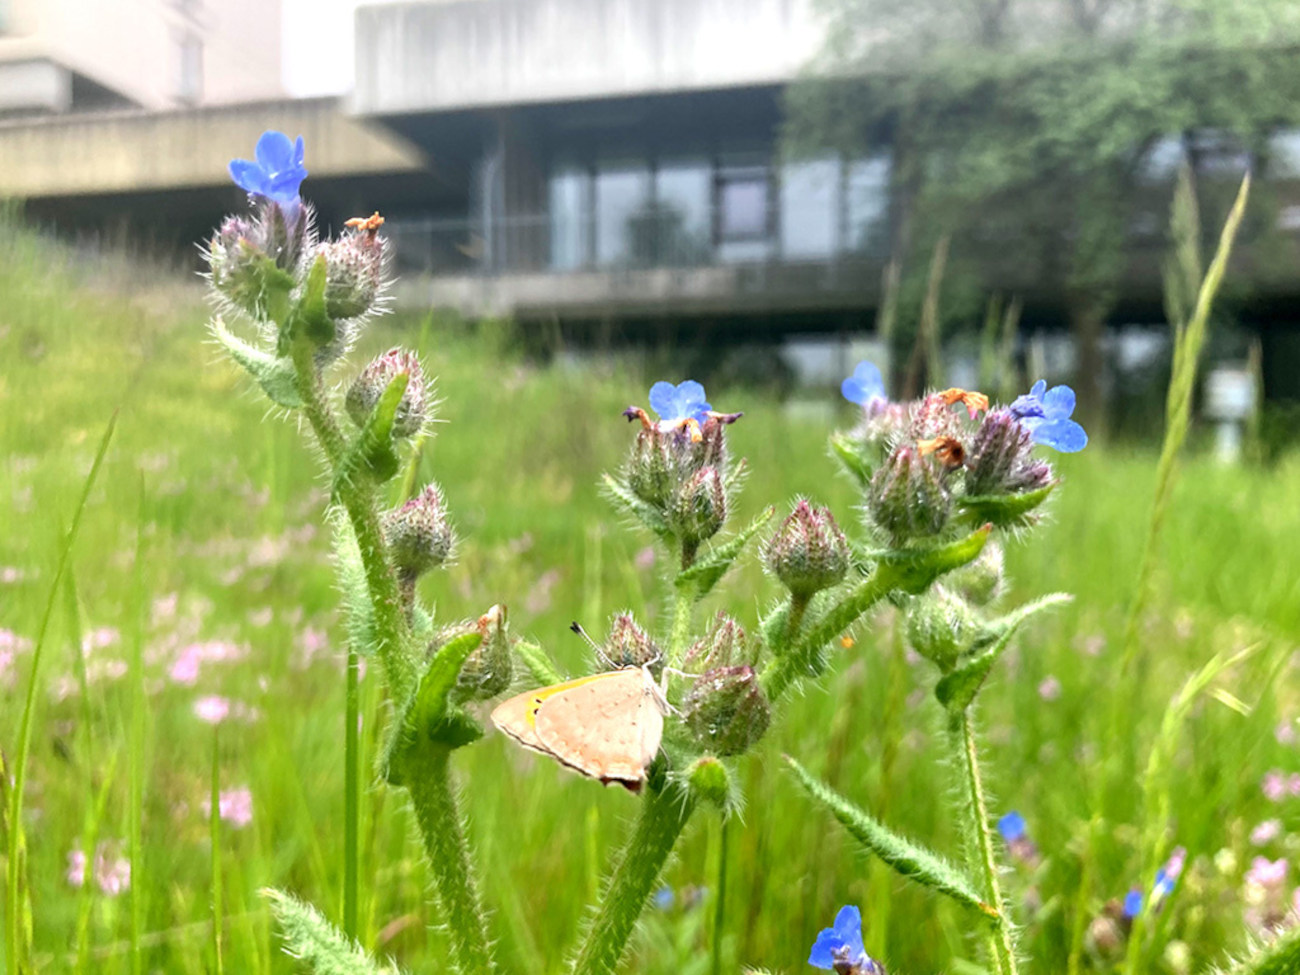 A small yellow butterfly sits on a flower with small blue blossoms. In the background, you can see the untamed meadow in front of a university building.